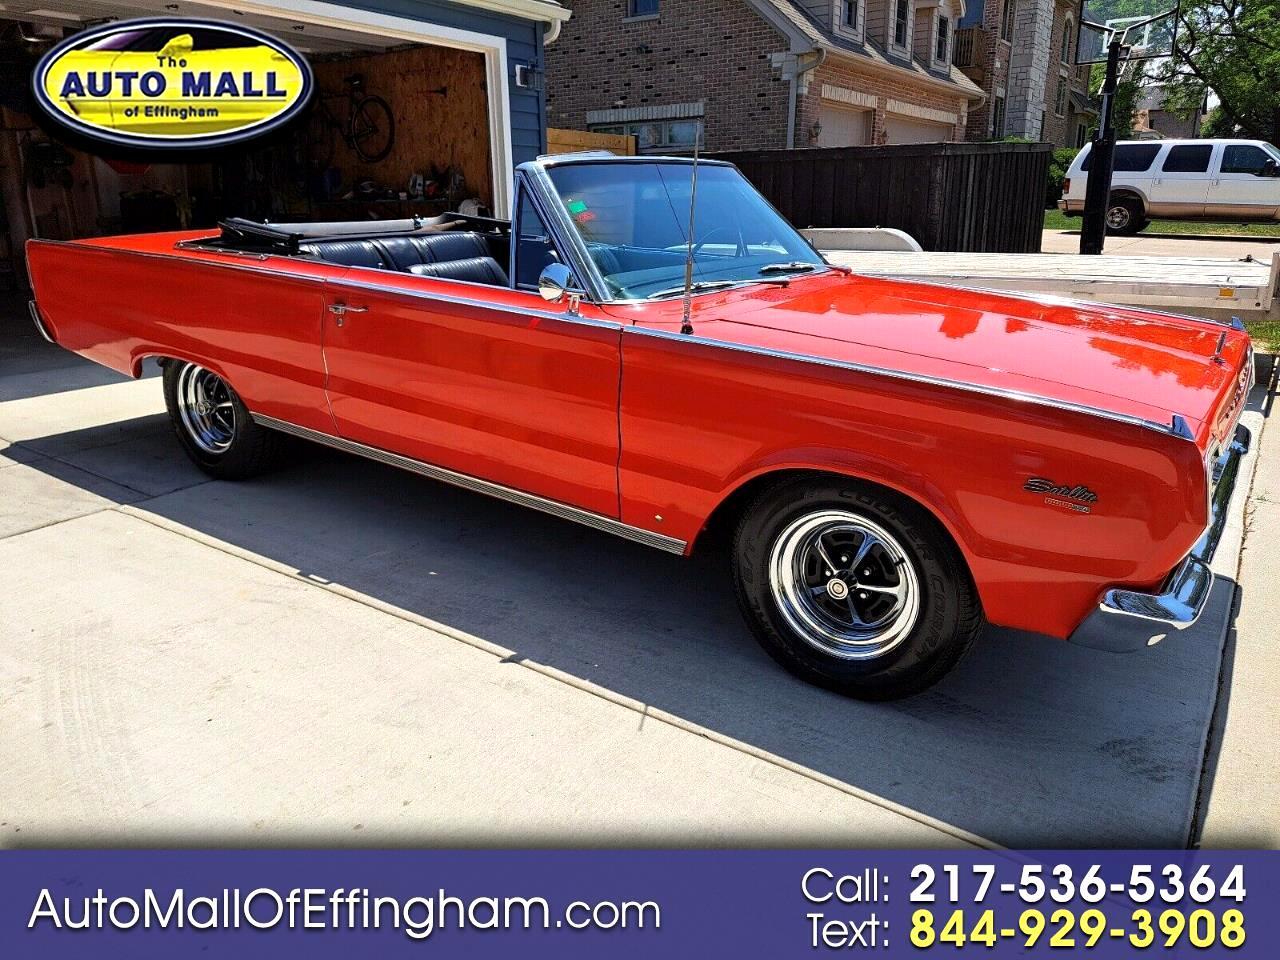 For Sale: 1966 Plymouth Satellite in Effingham, Illinois for sale in Effingham, IL